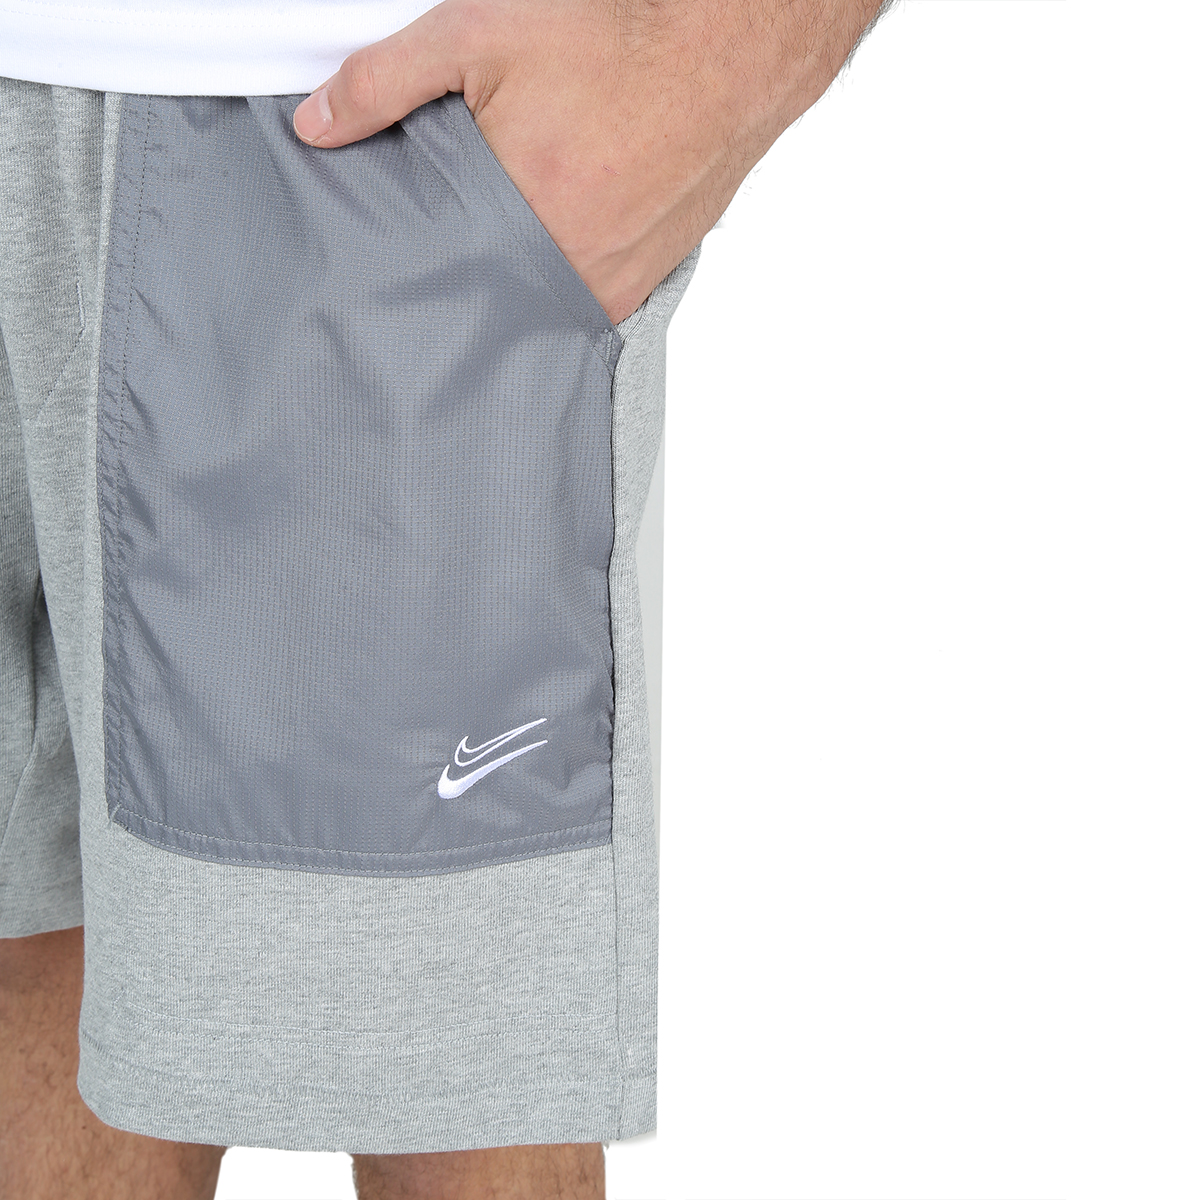 Short Nike Kevin Durant Hombre,  image number null